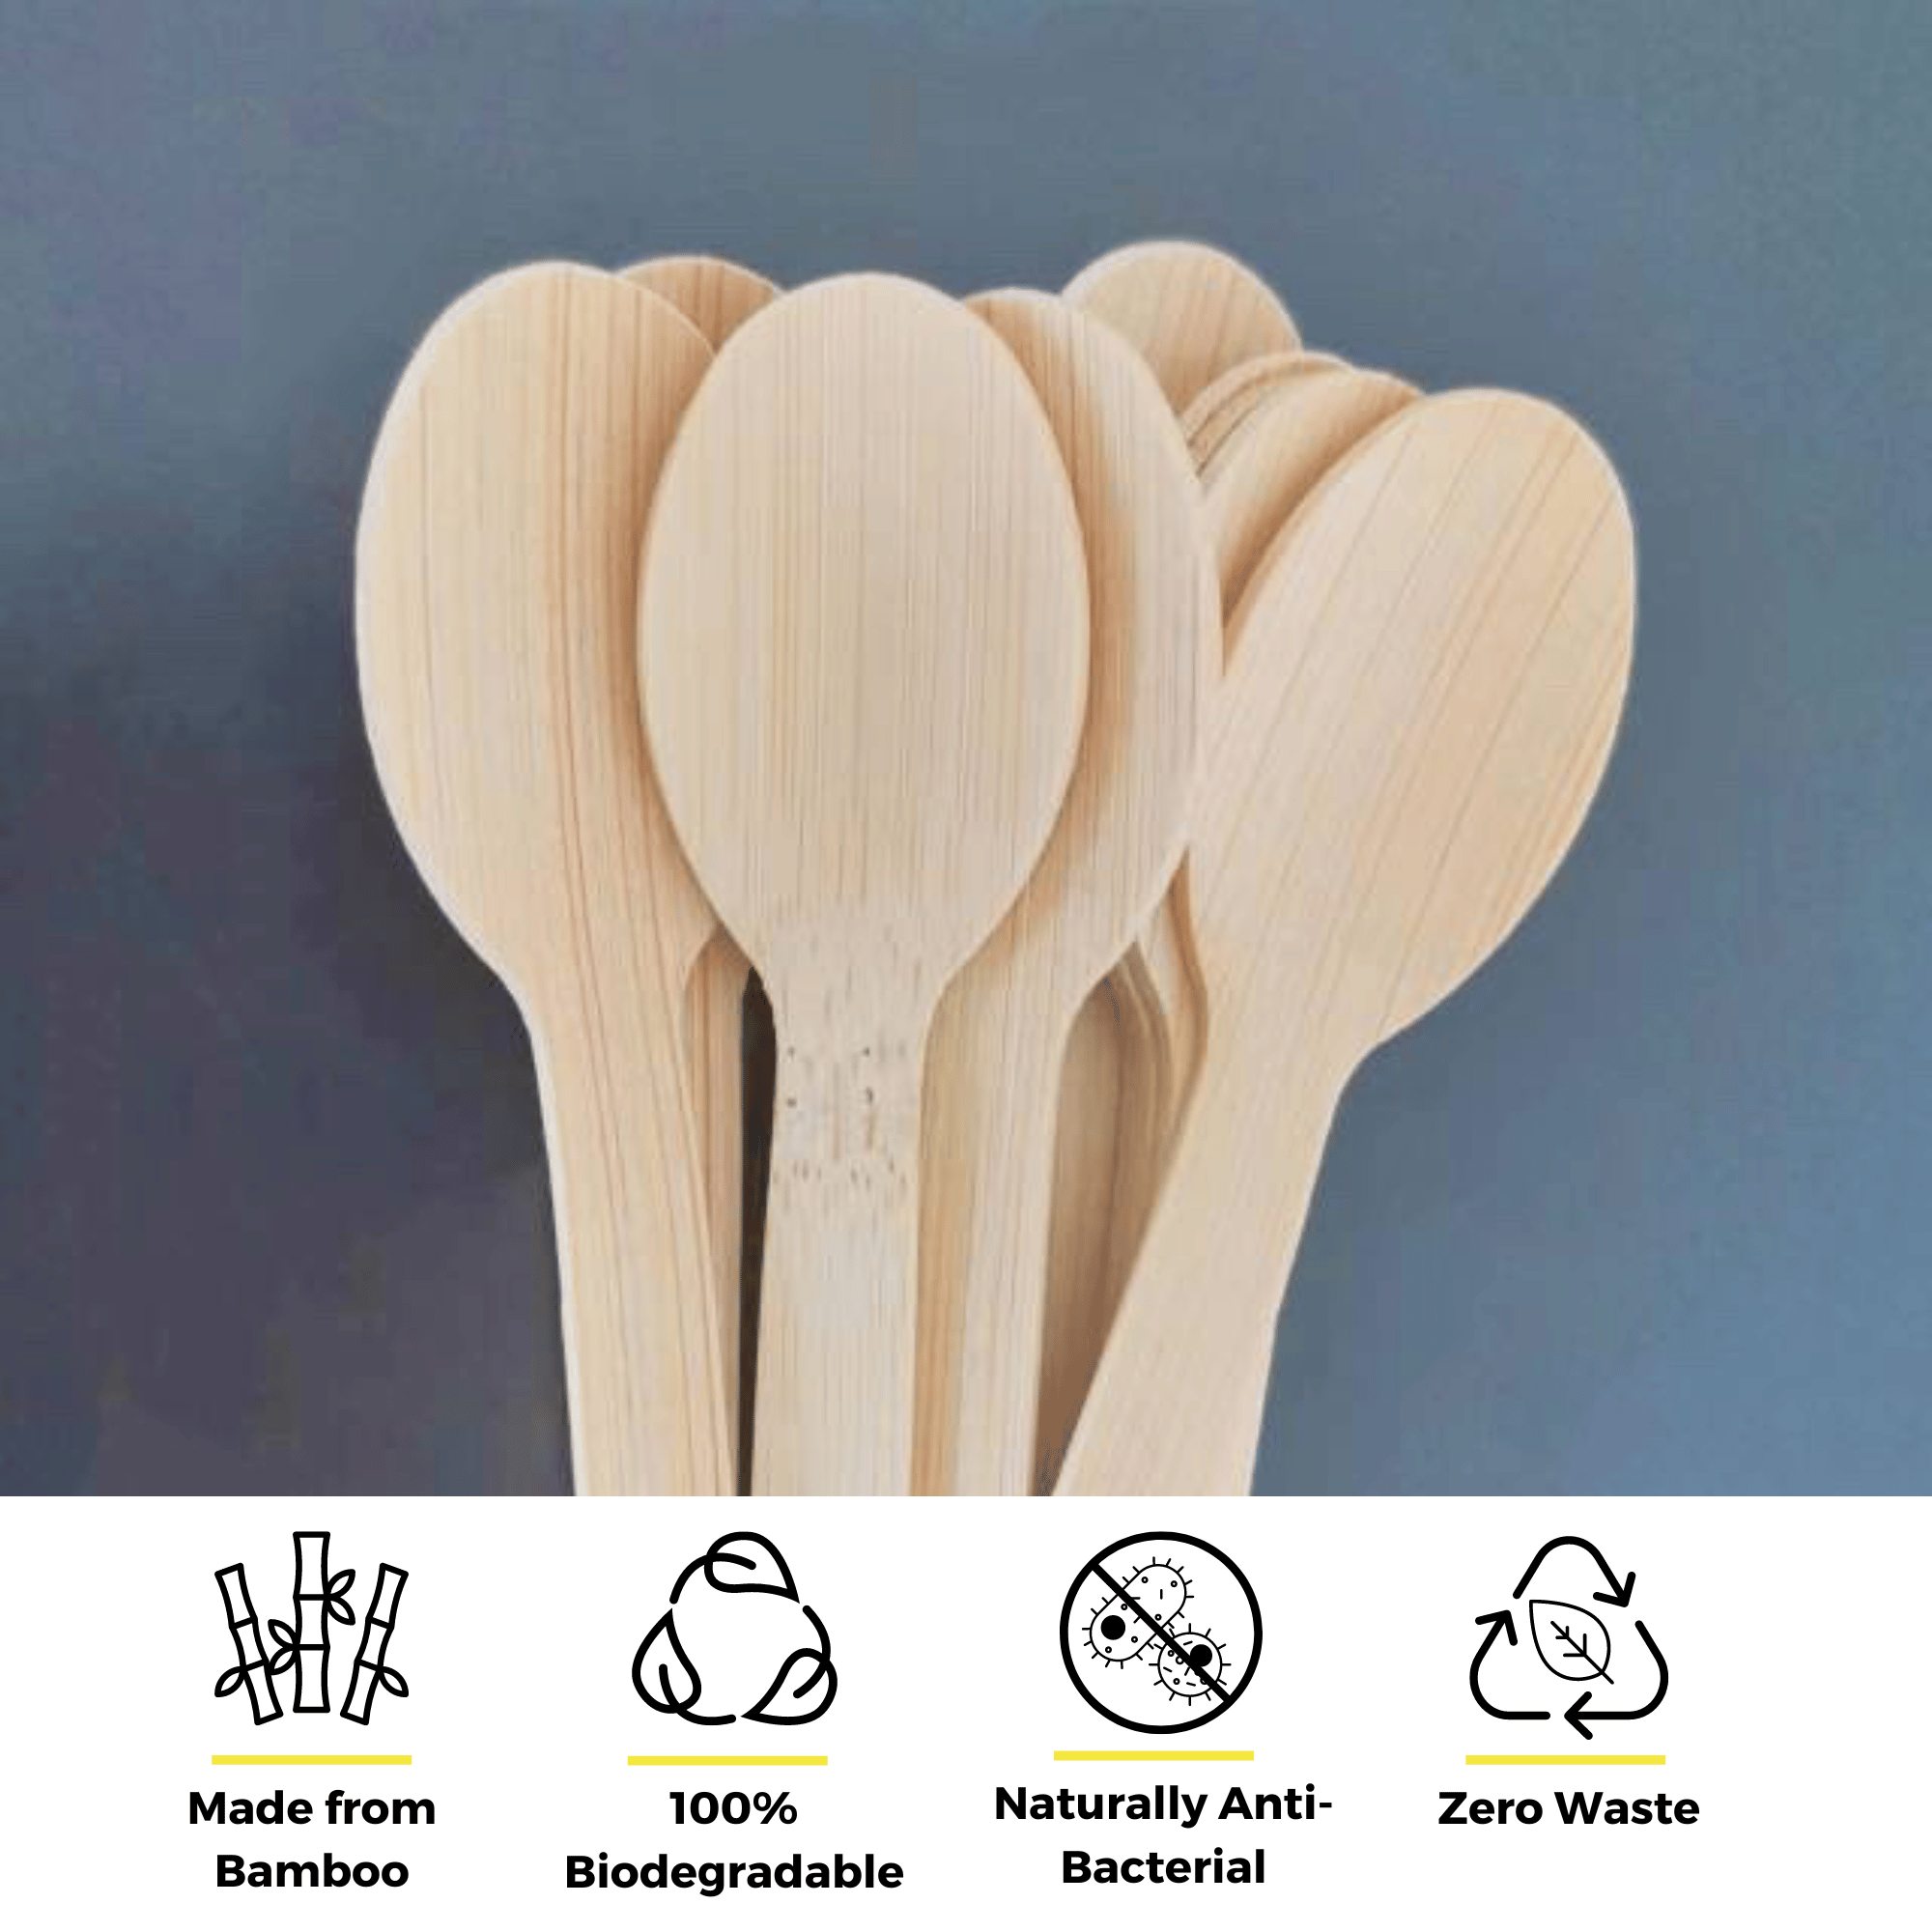 A bundle of bamboo spoons by Holy City Straw Co. grouped together on a dark background, showcasing the product's smooth, natural texture. Accompanying eco-friendly feature icons below highlight that the spoons are Made from Bamboo, 100% Biodegradable, Naturally Anti-Bacterial, and contribute to Zero Waste.